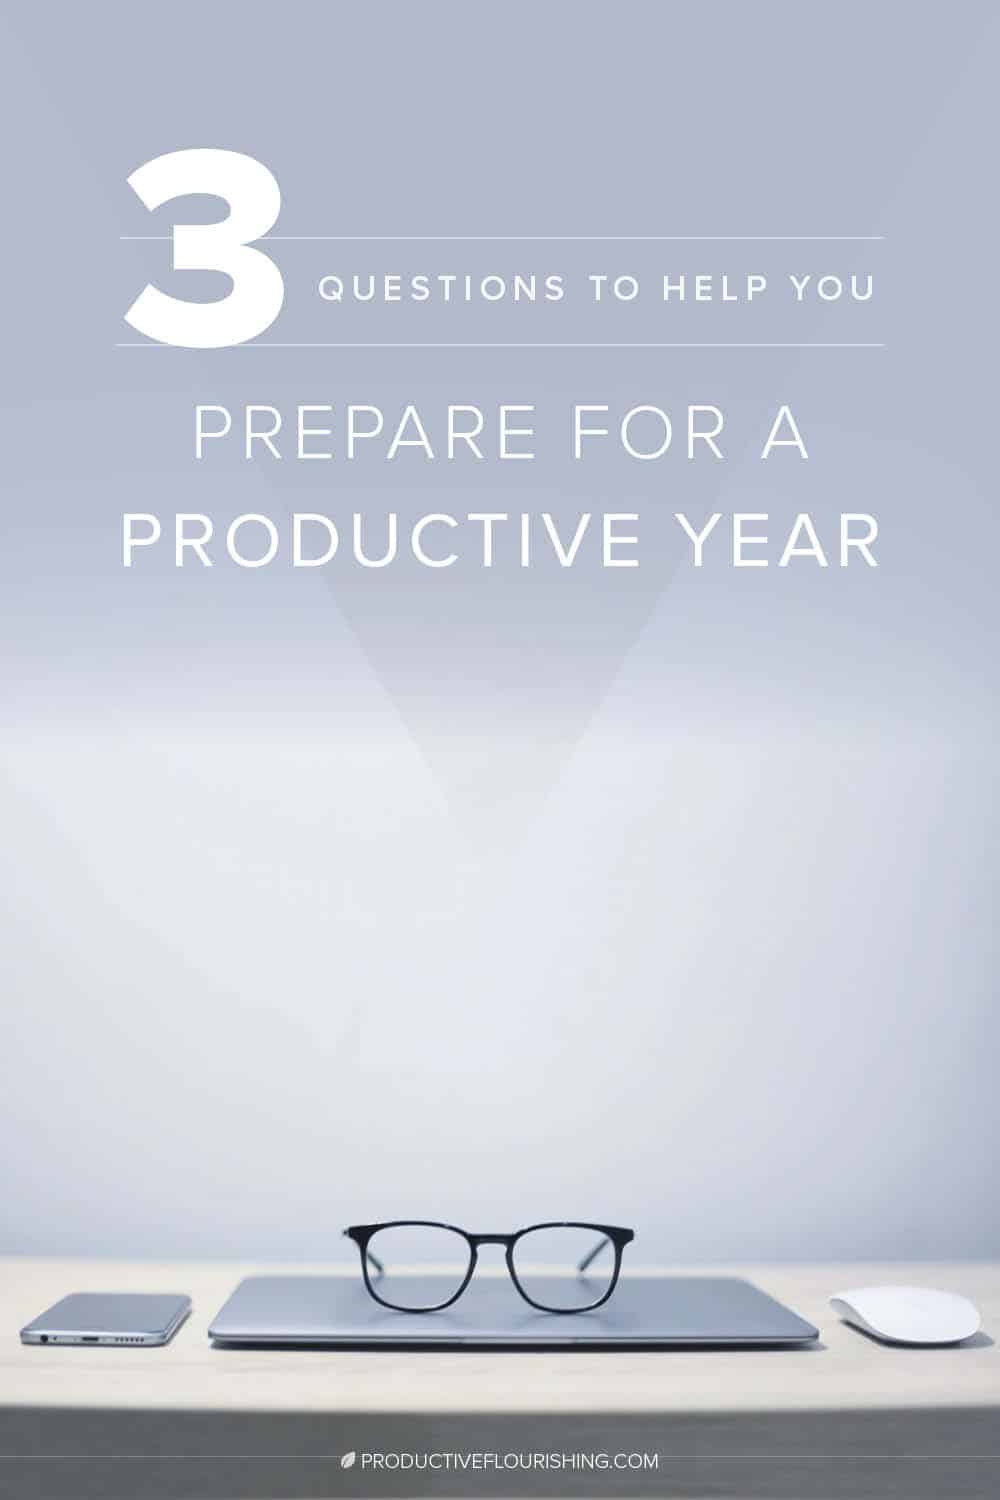 Yes, I know it’s almost mid-February. I also know that many people are still trying to plan so they can have a productive year — which is why I’m pushing this out now. Here are 3 questions to help you prepare for a productive year. #productivity #businessgoals #productiveflourishing